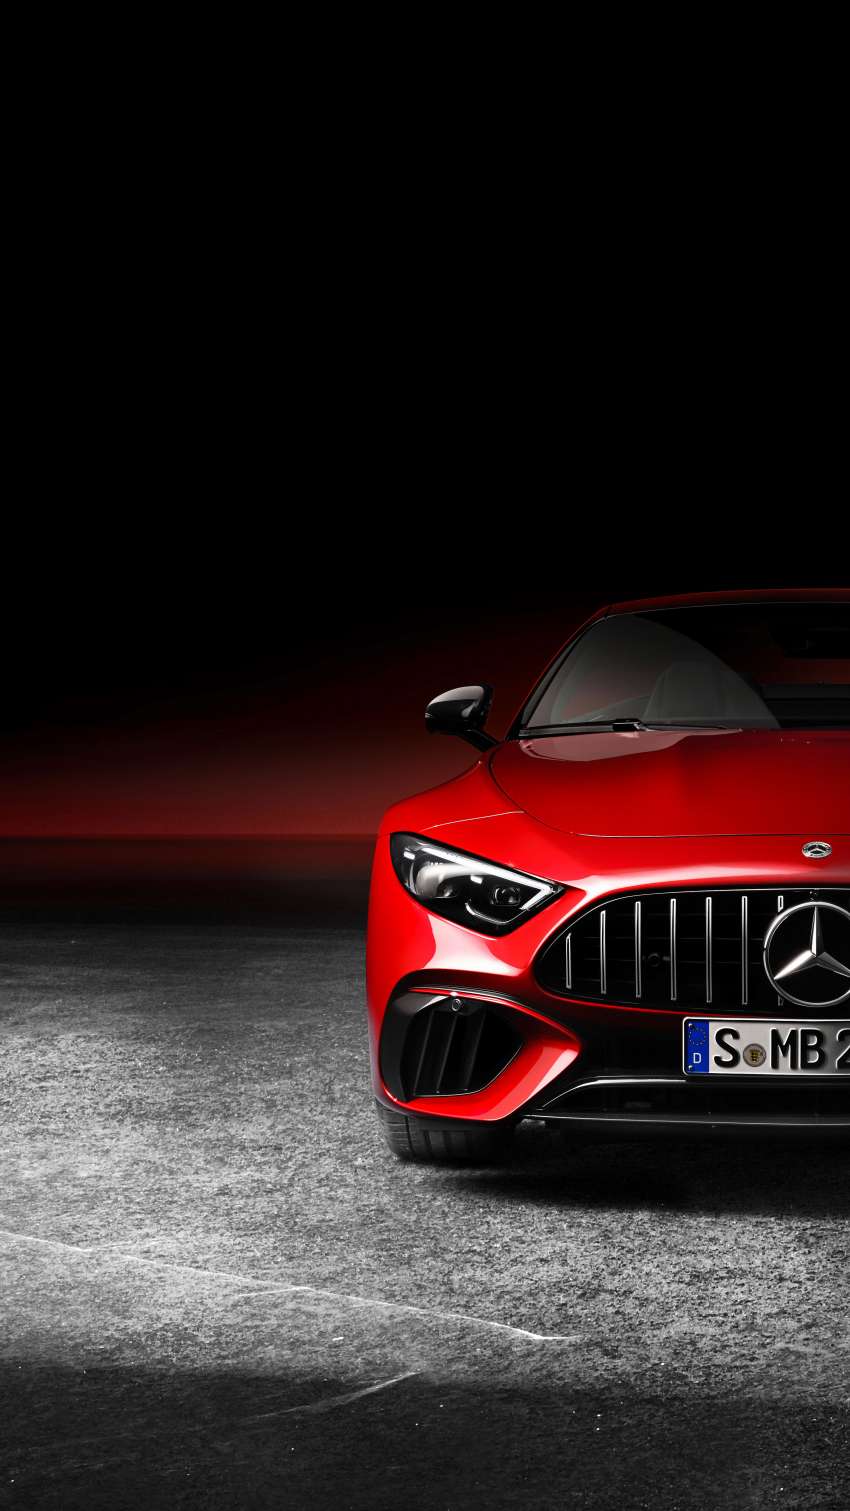 2022 Mercedes-AMG SL revealed – R232 developed by Affalterbach, 476 PS SL55, 585 PS SL63, PHEV later Image #1369257